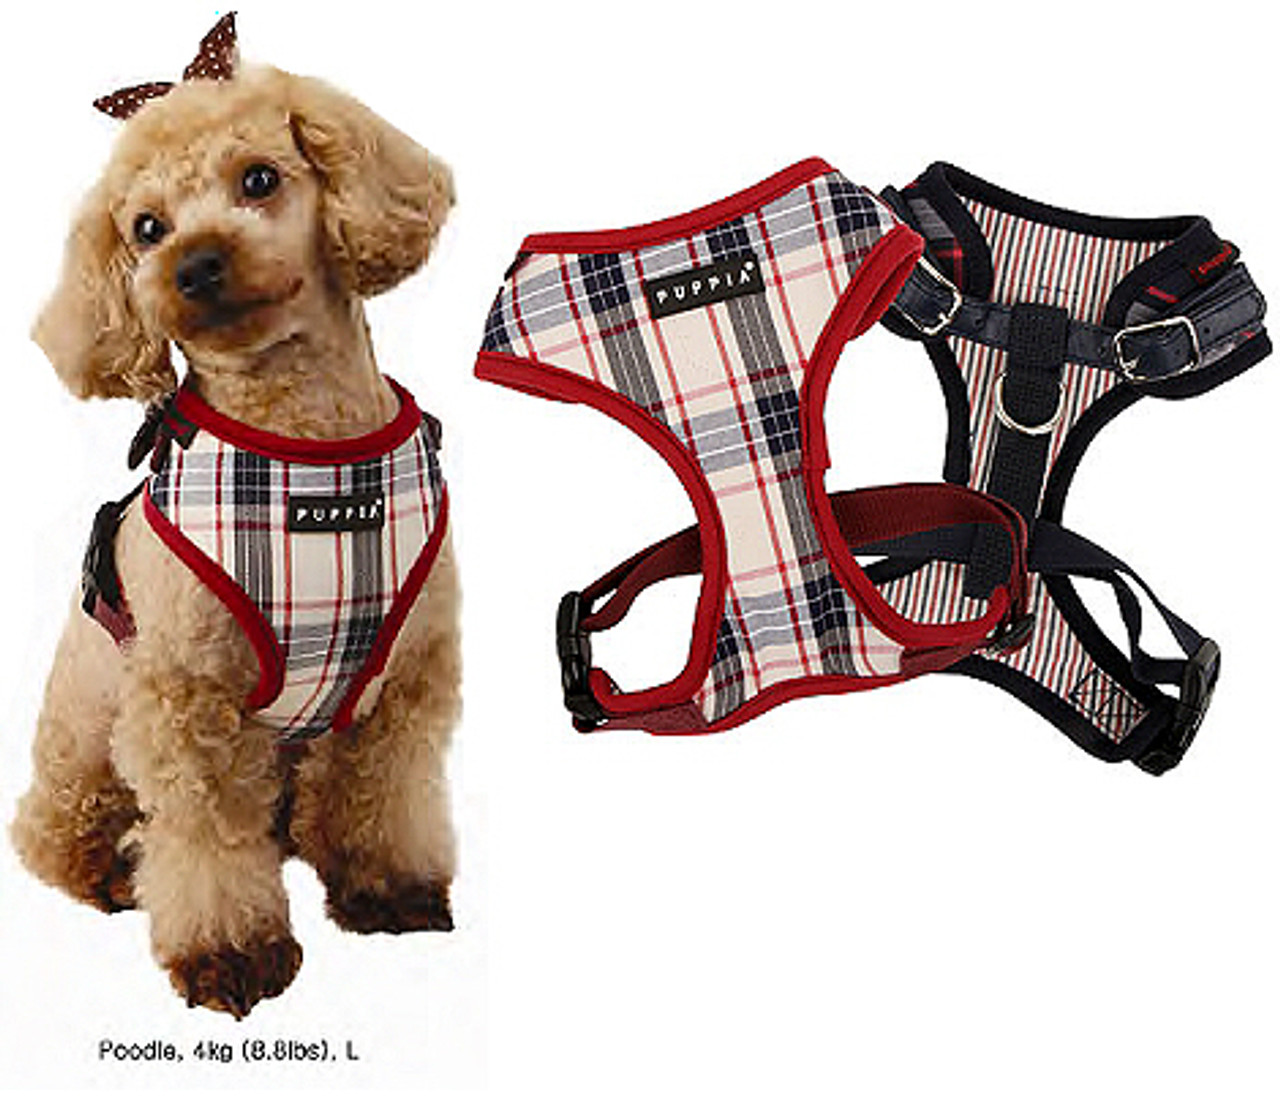 puppia harness and lead set